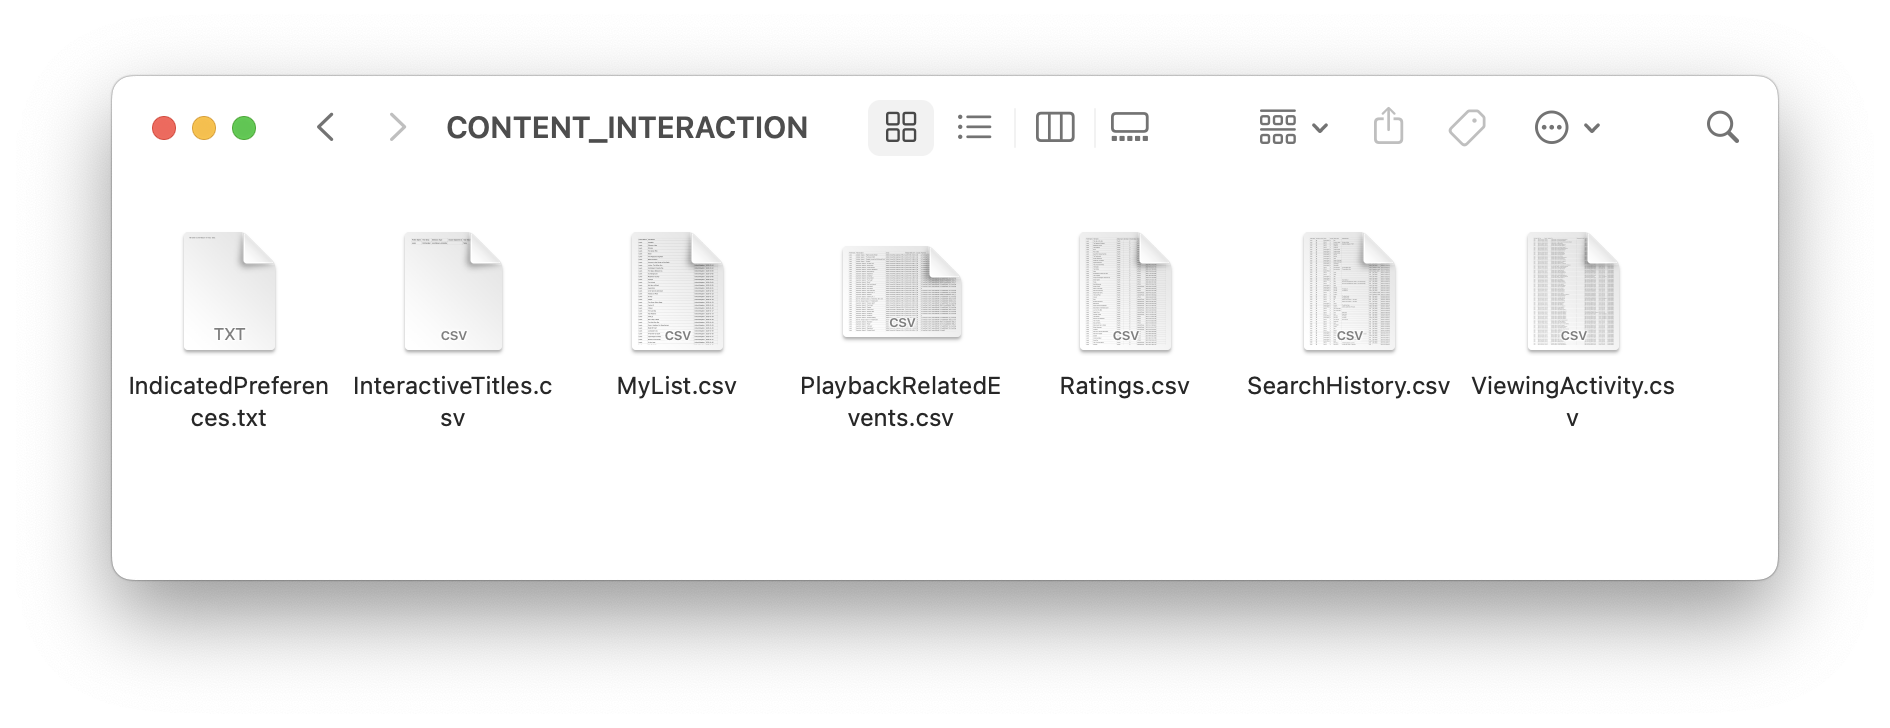 A Mac OS Finder window for a folder called content interaction. Inside it are a number of text files and csv files for various interactive playback events, including my viewing activity.